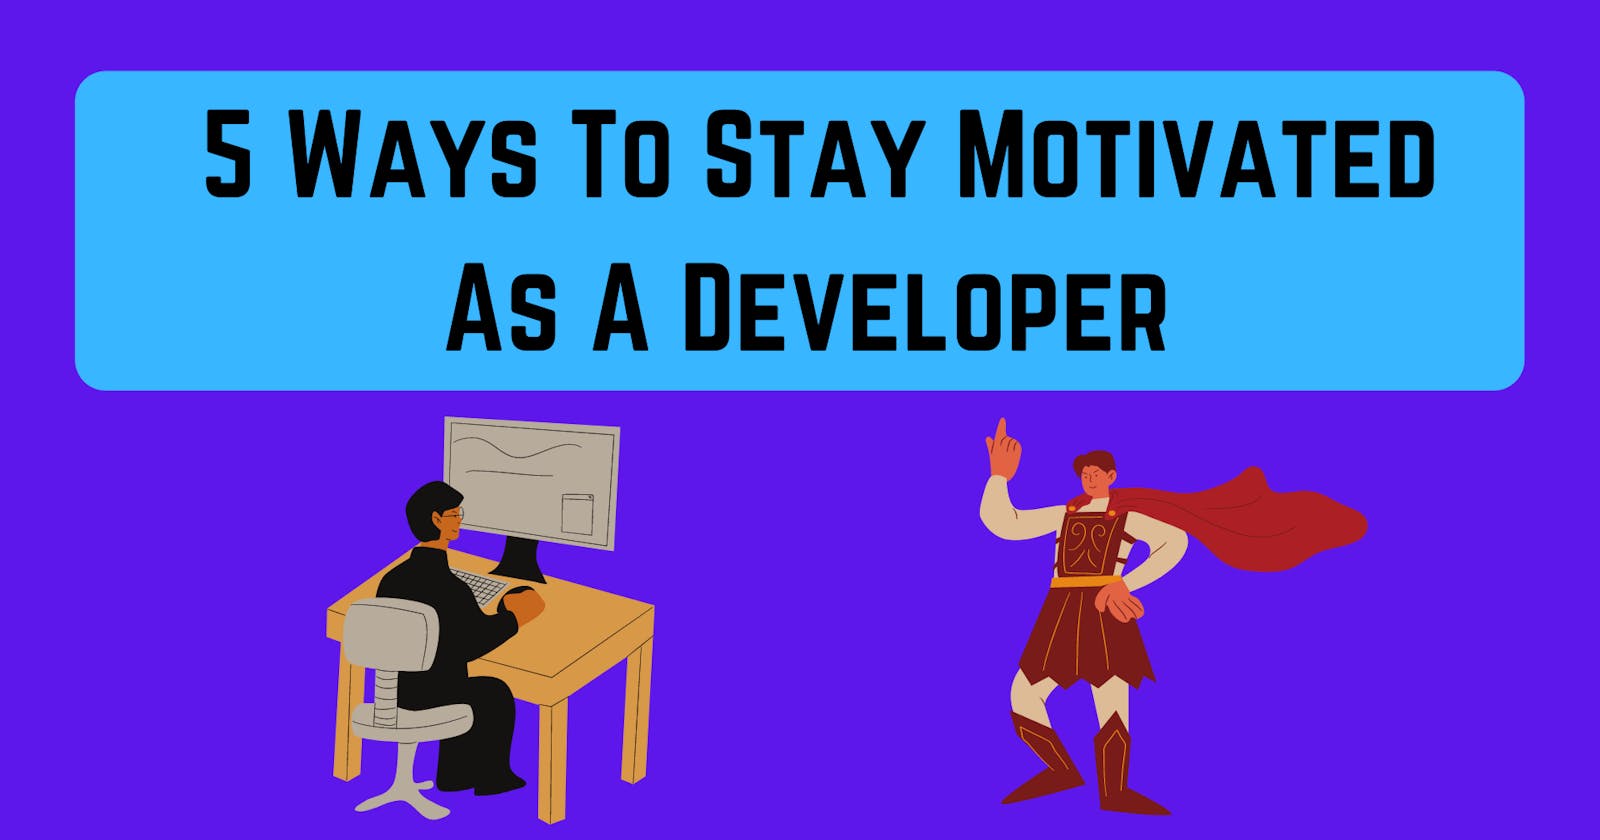 5 Ways To Stay Motivated As A Developer